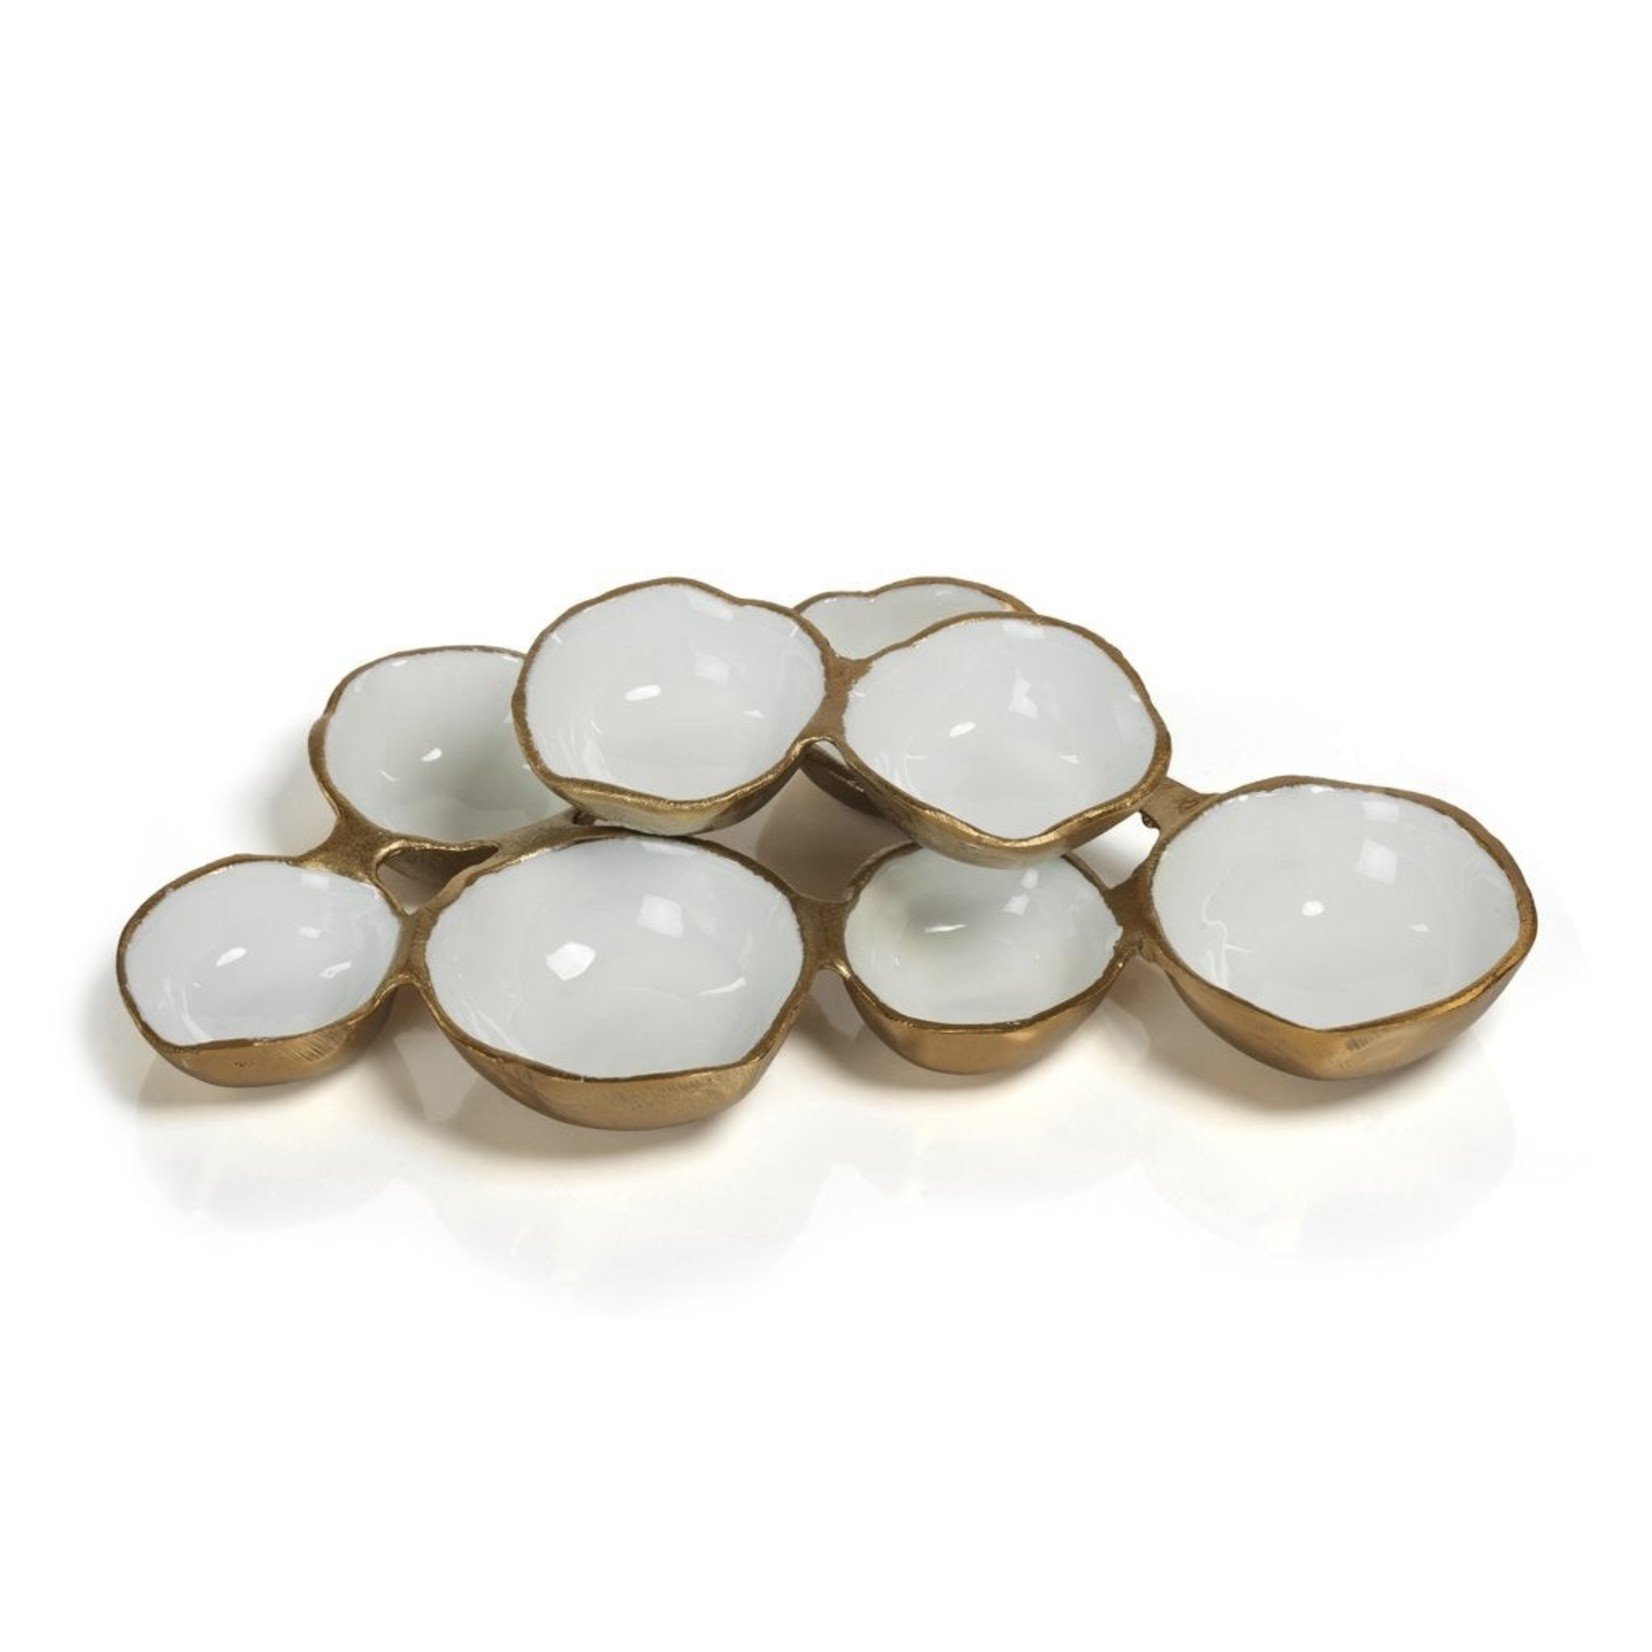 Zodax Small Cluster of 8 Bowls Gold w/White Enamel